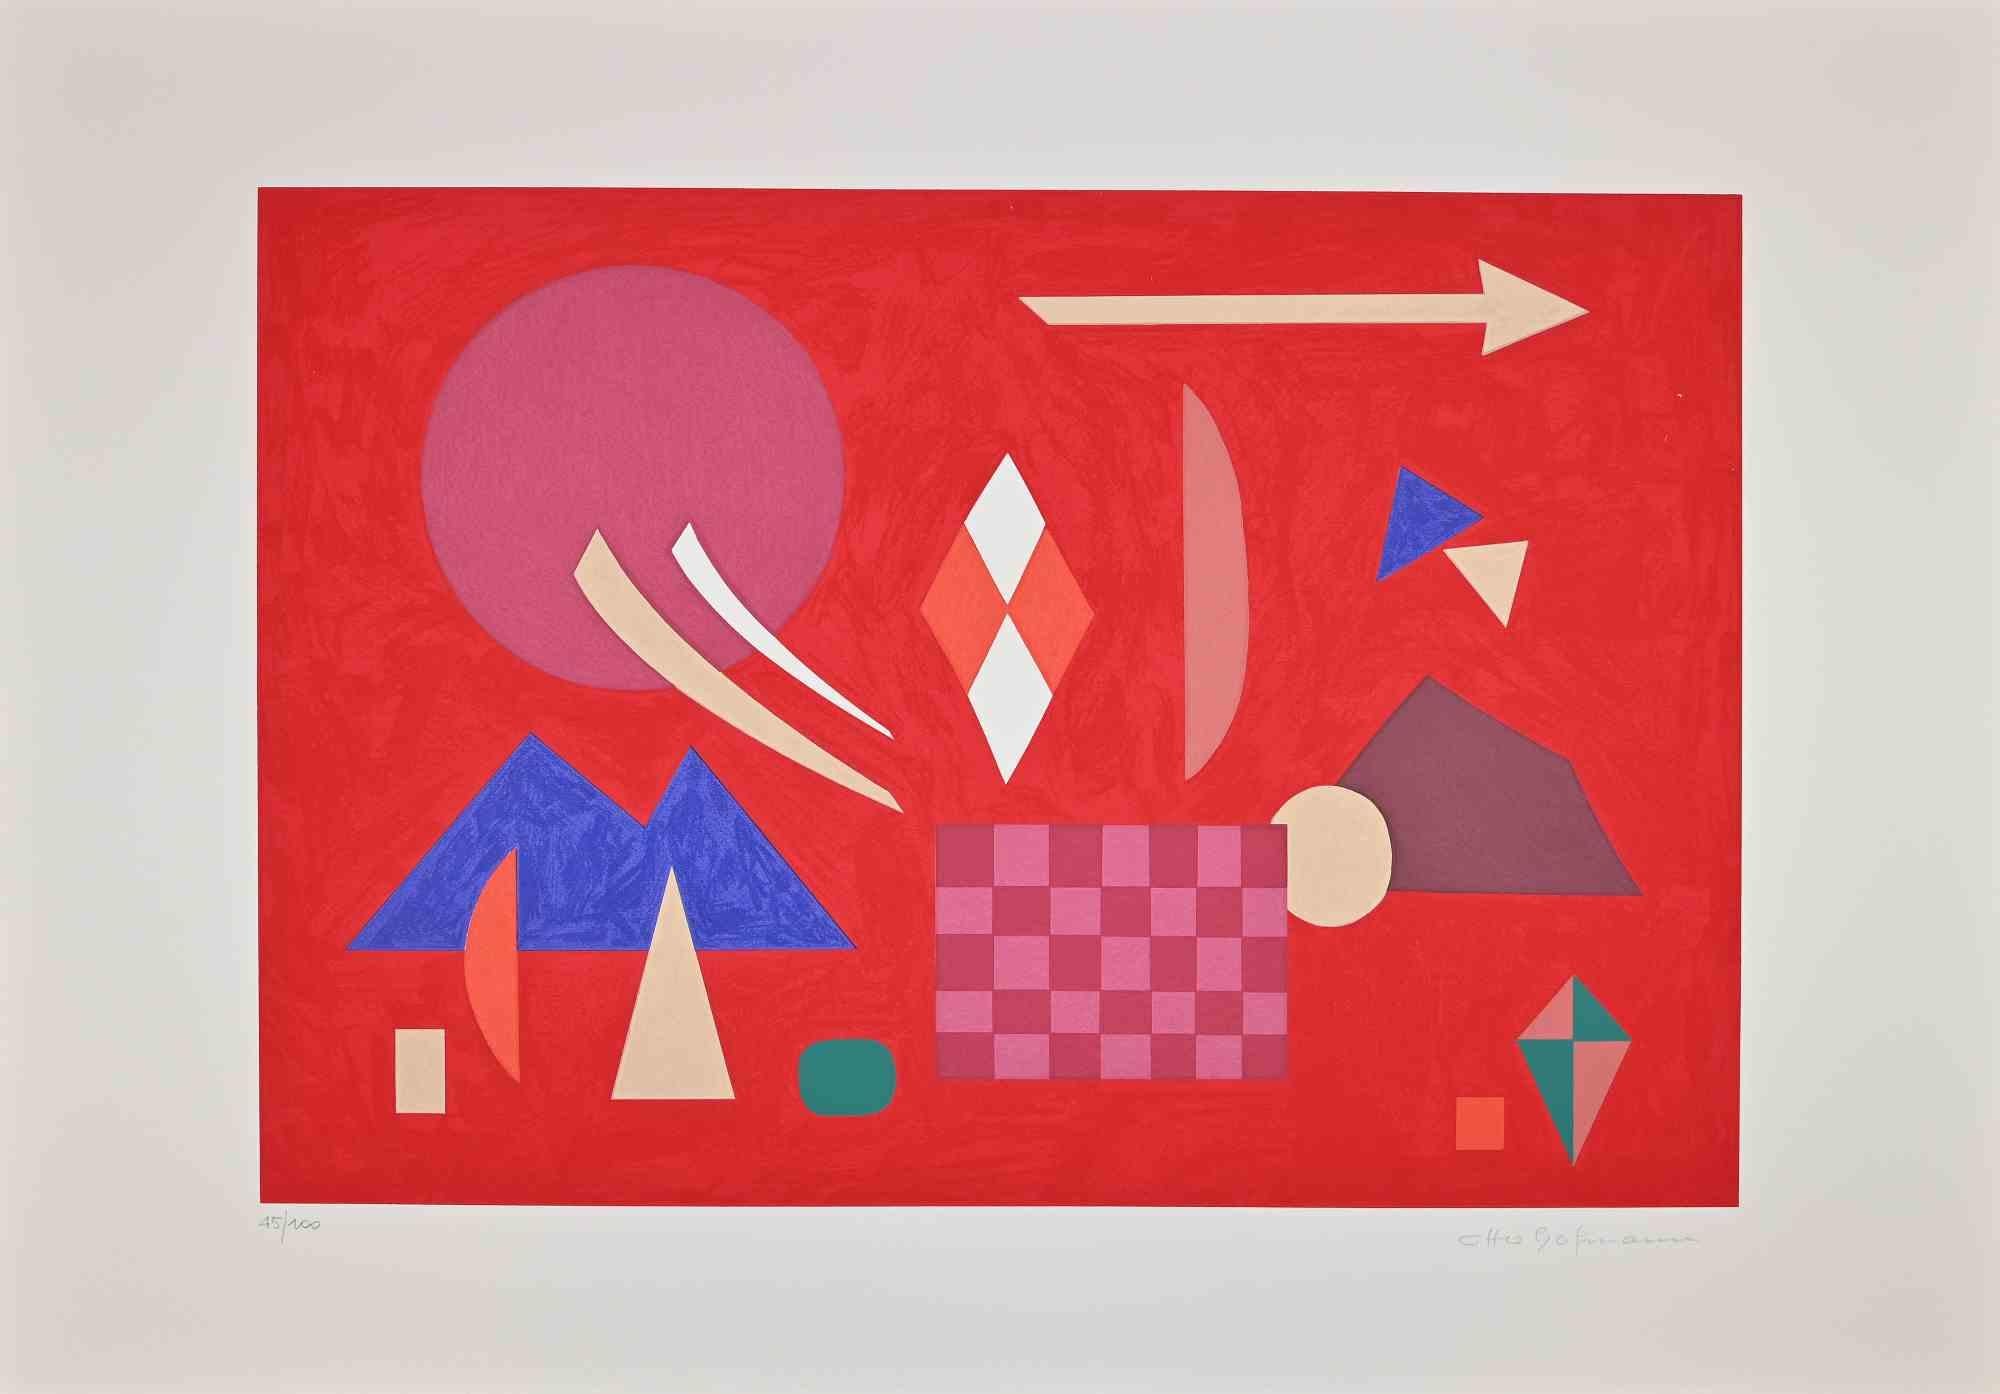 Red composition is an original contemporary artwork realized by Otto Hofmann in 1989.

Mixed colored screen print.

Hand signed on the lower right margin.

Numbered on the lower left. Edition of 45/100.

The artwork is from a potfolio edited by